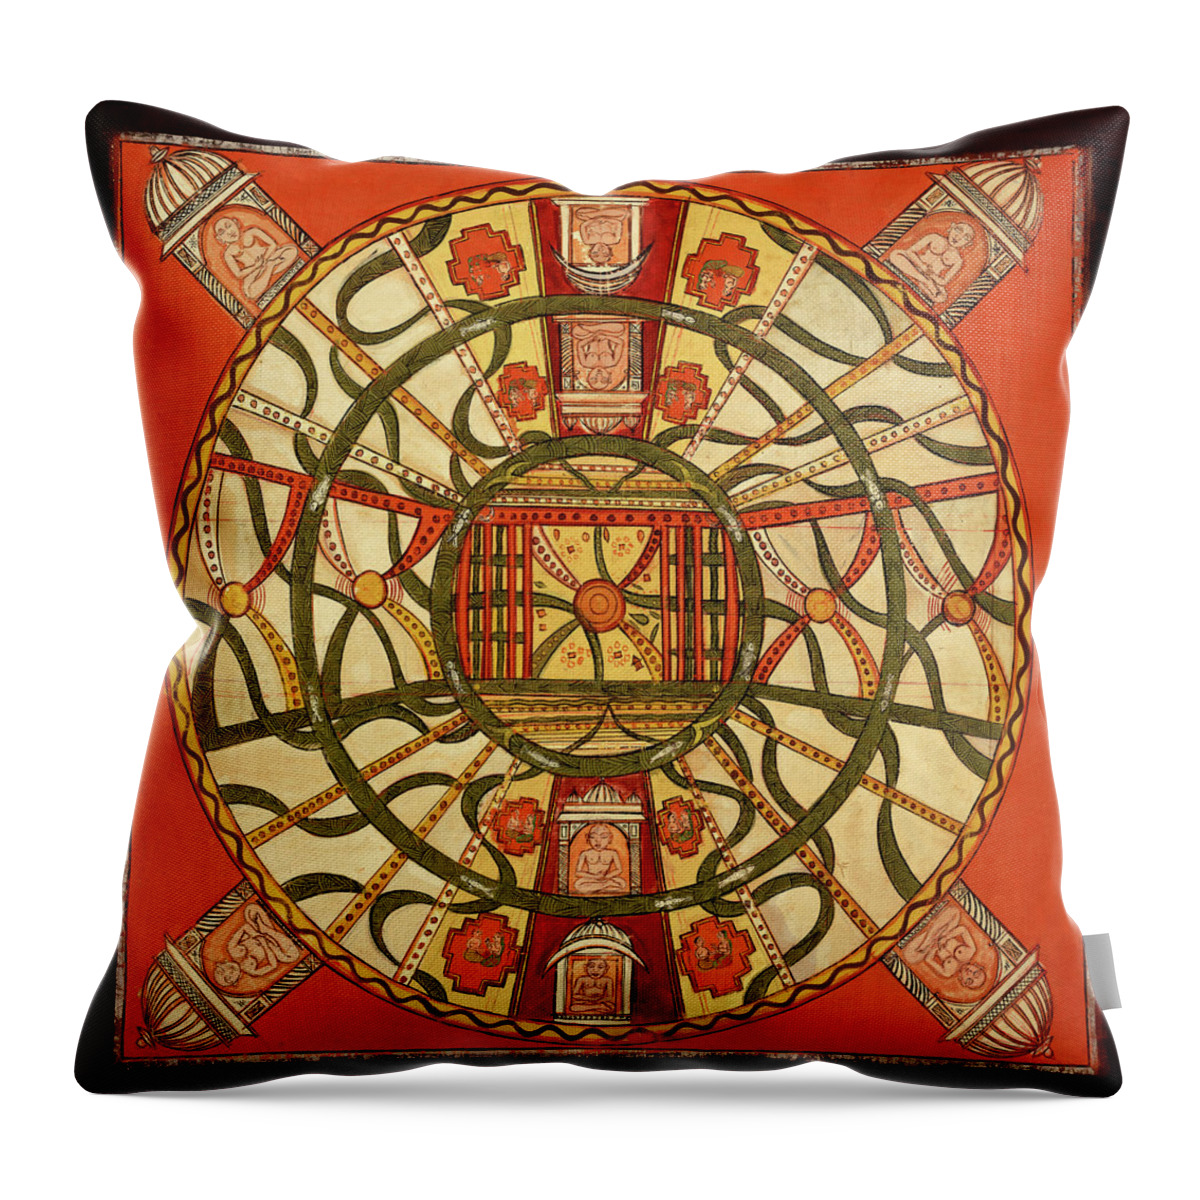 Celestial Throw Pillow featuring the photograph Vintage Celestial Chart 1900 by Andrew Fare